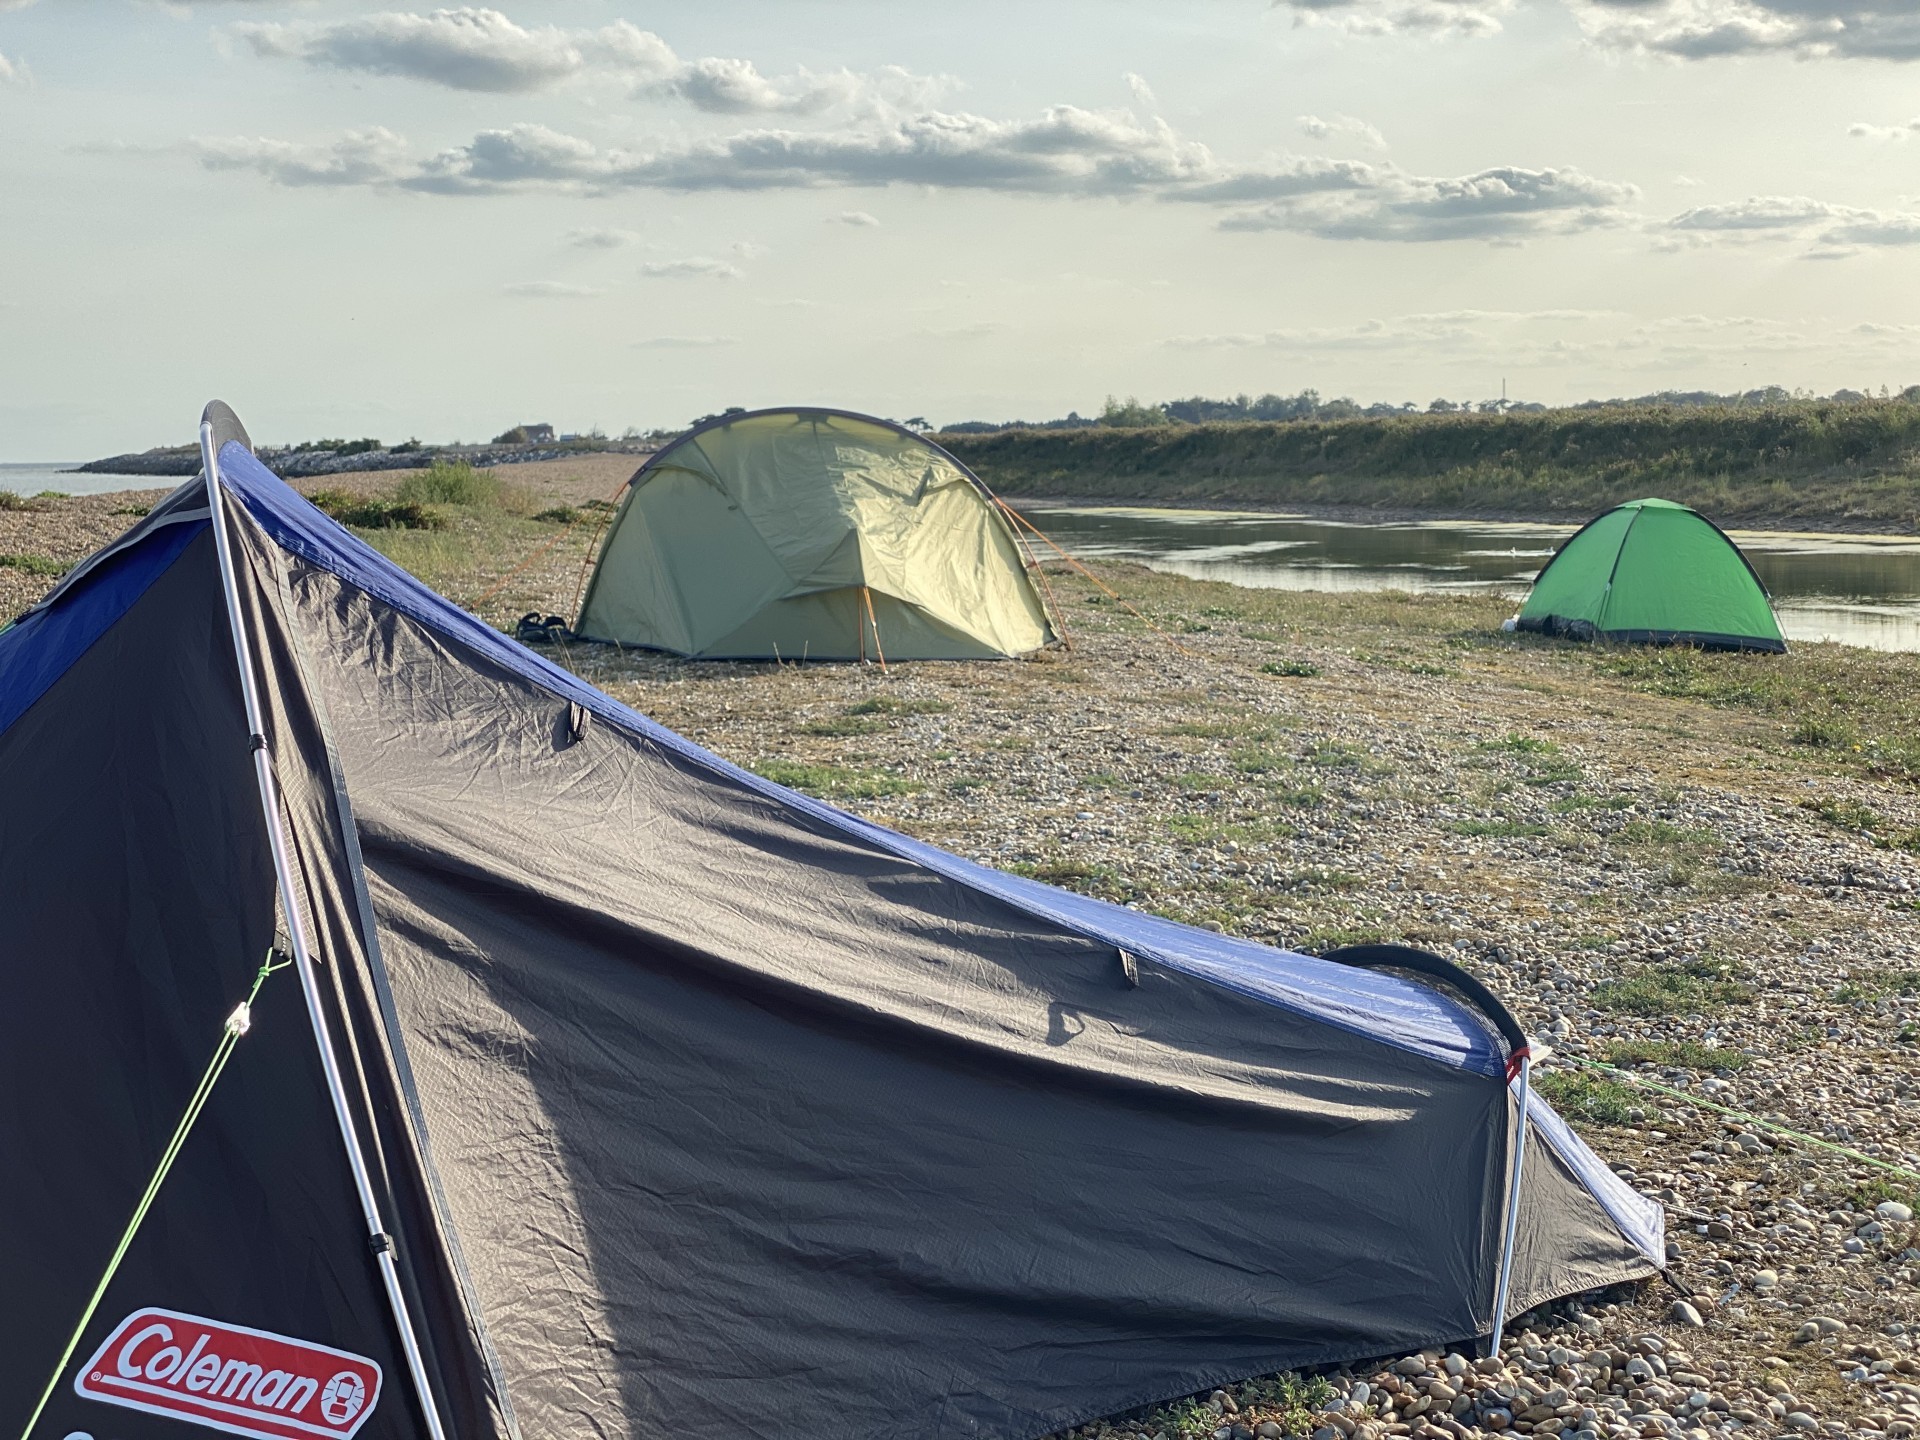 Learn how to pitch a tent efficiently when wild camping with NOMAD Sea Kayaking.